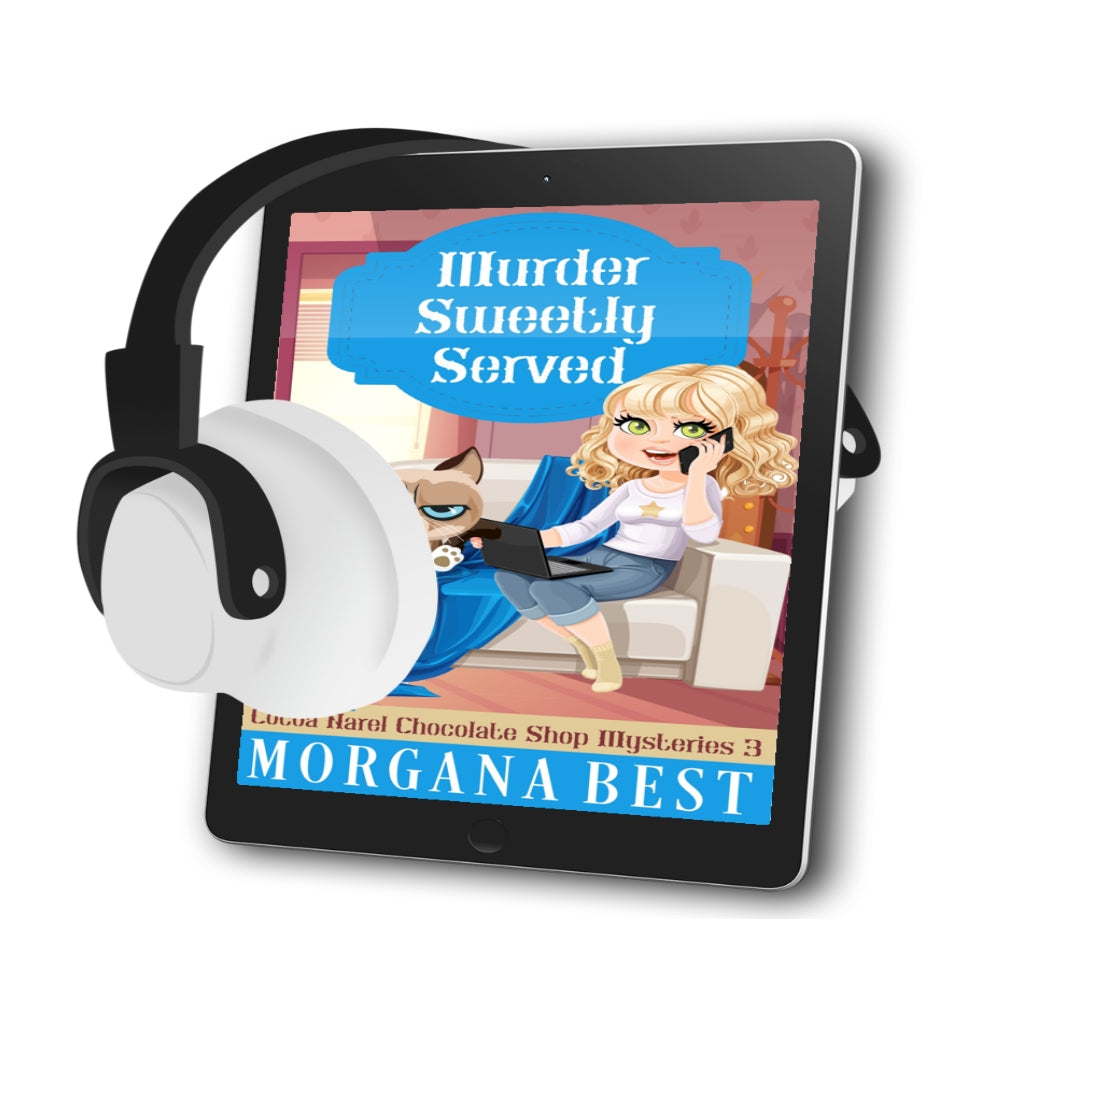 Murder Sweetly Served AUDIOBOOK cozy mystery by morgana best